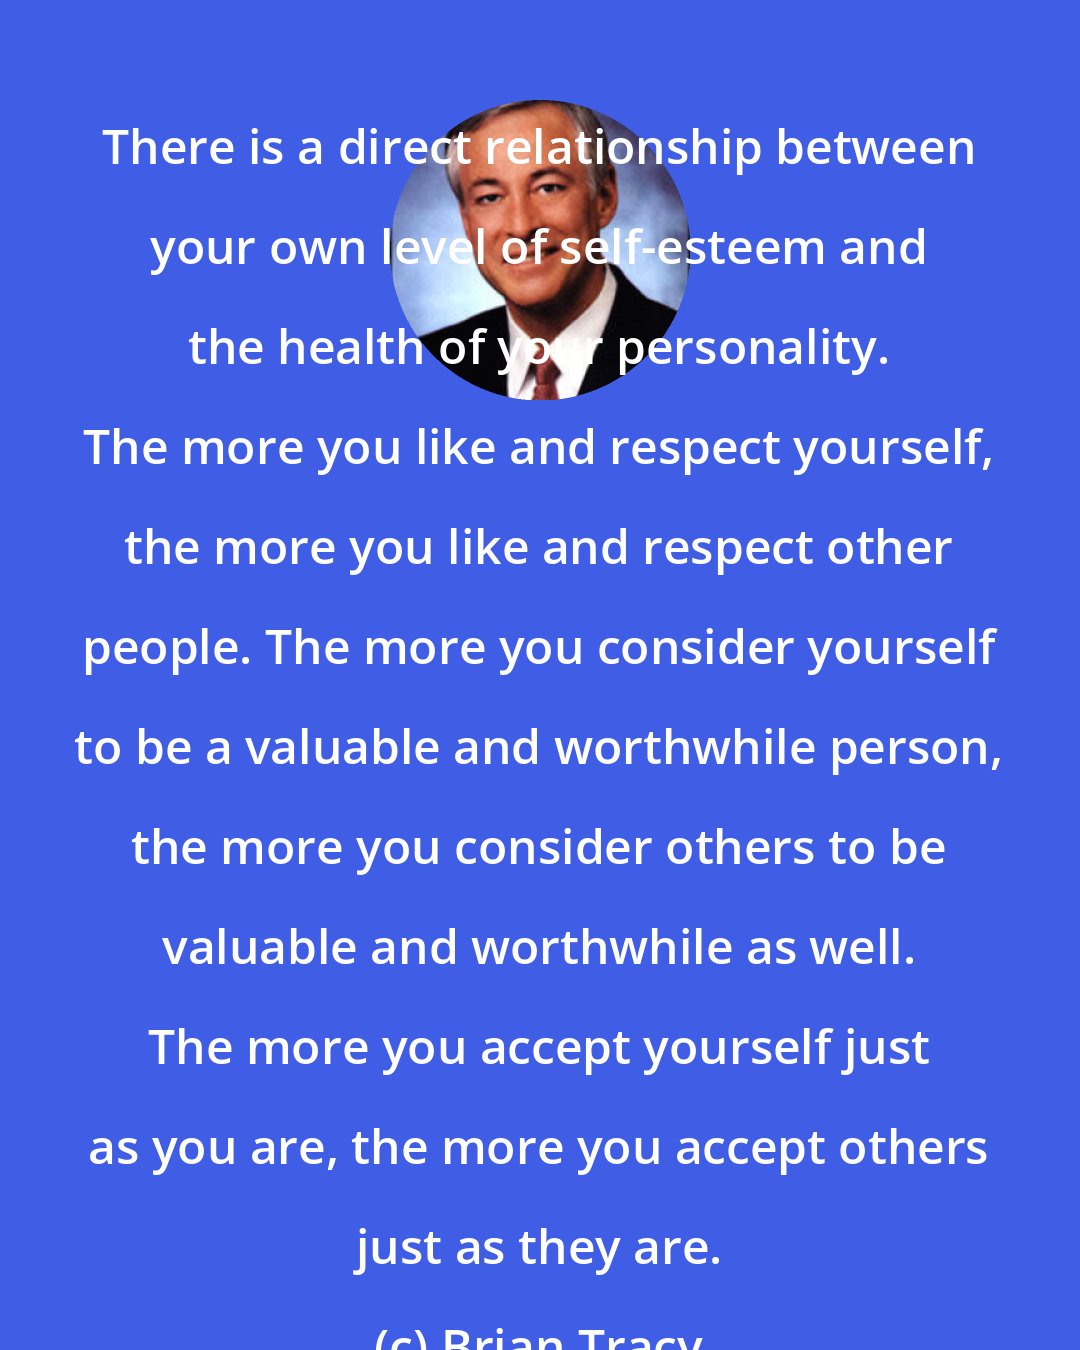 Brian Tracy: There is a direct relationship between your own level of self-esteem and the health of your personality. The more you like and respect yourself, the more you like and respect other people. The more you consider yourself to be a valuable and worthwhile person, the more you consider others to be valuable and worthwhile as well. The more you accept yourself just as you are, the more you accept others just as they are.